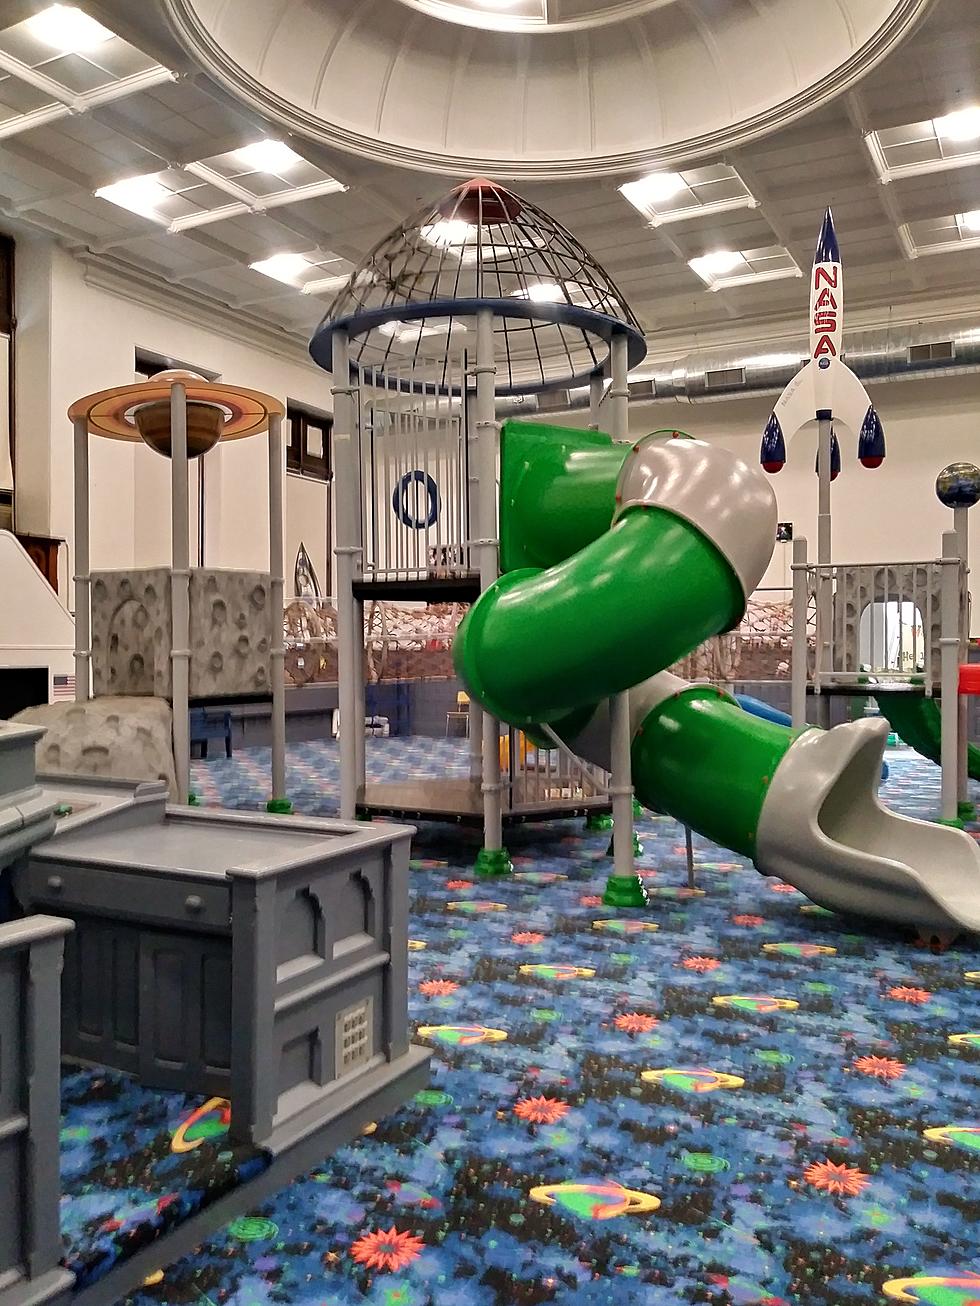 Blast Off Into Fun at the Children’s Museum of Greater Fall River